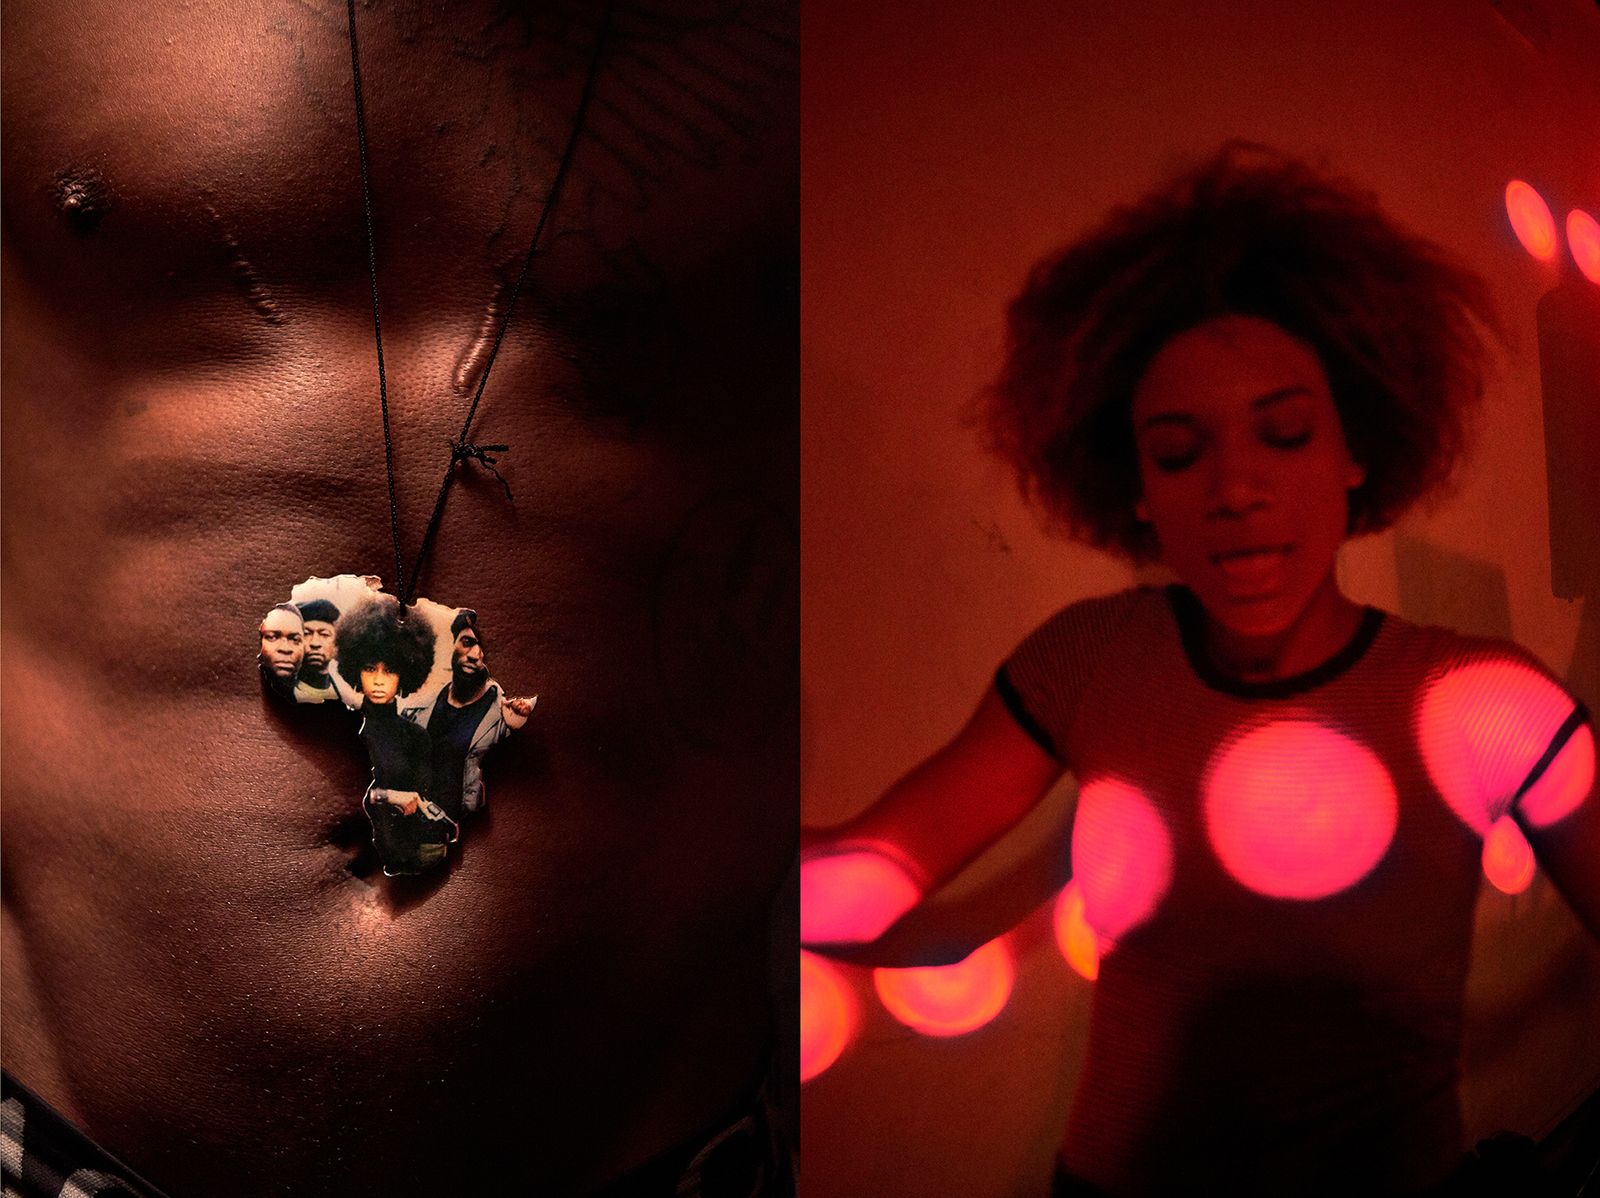 © Johanna Alarcón - 01. Black panther necklace on an African map. Quito 2019 02. A girl dances at a dancehall party. Quito 2019